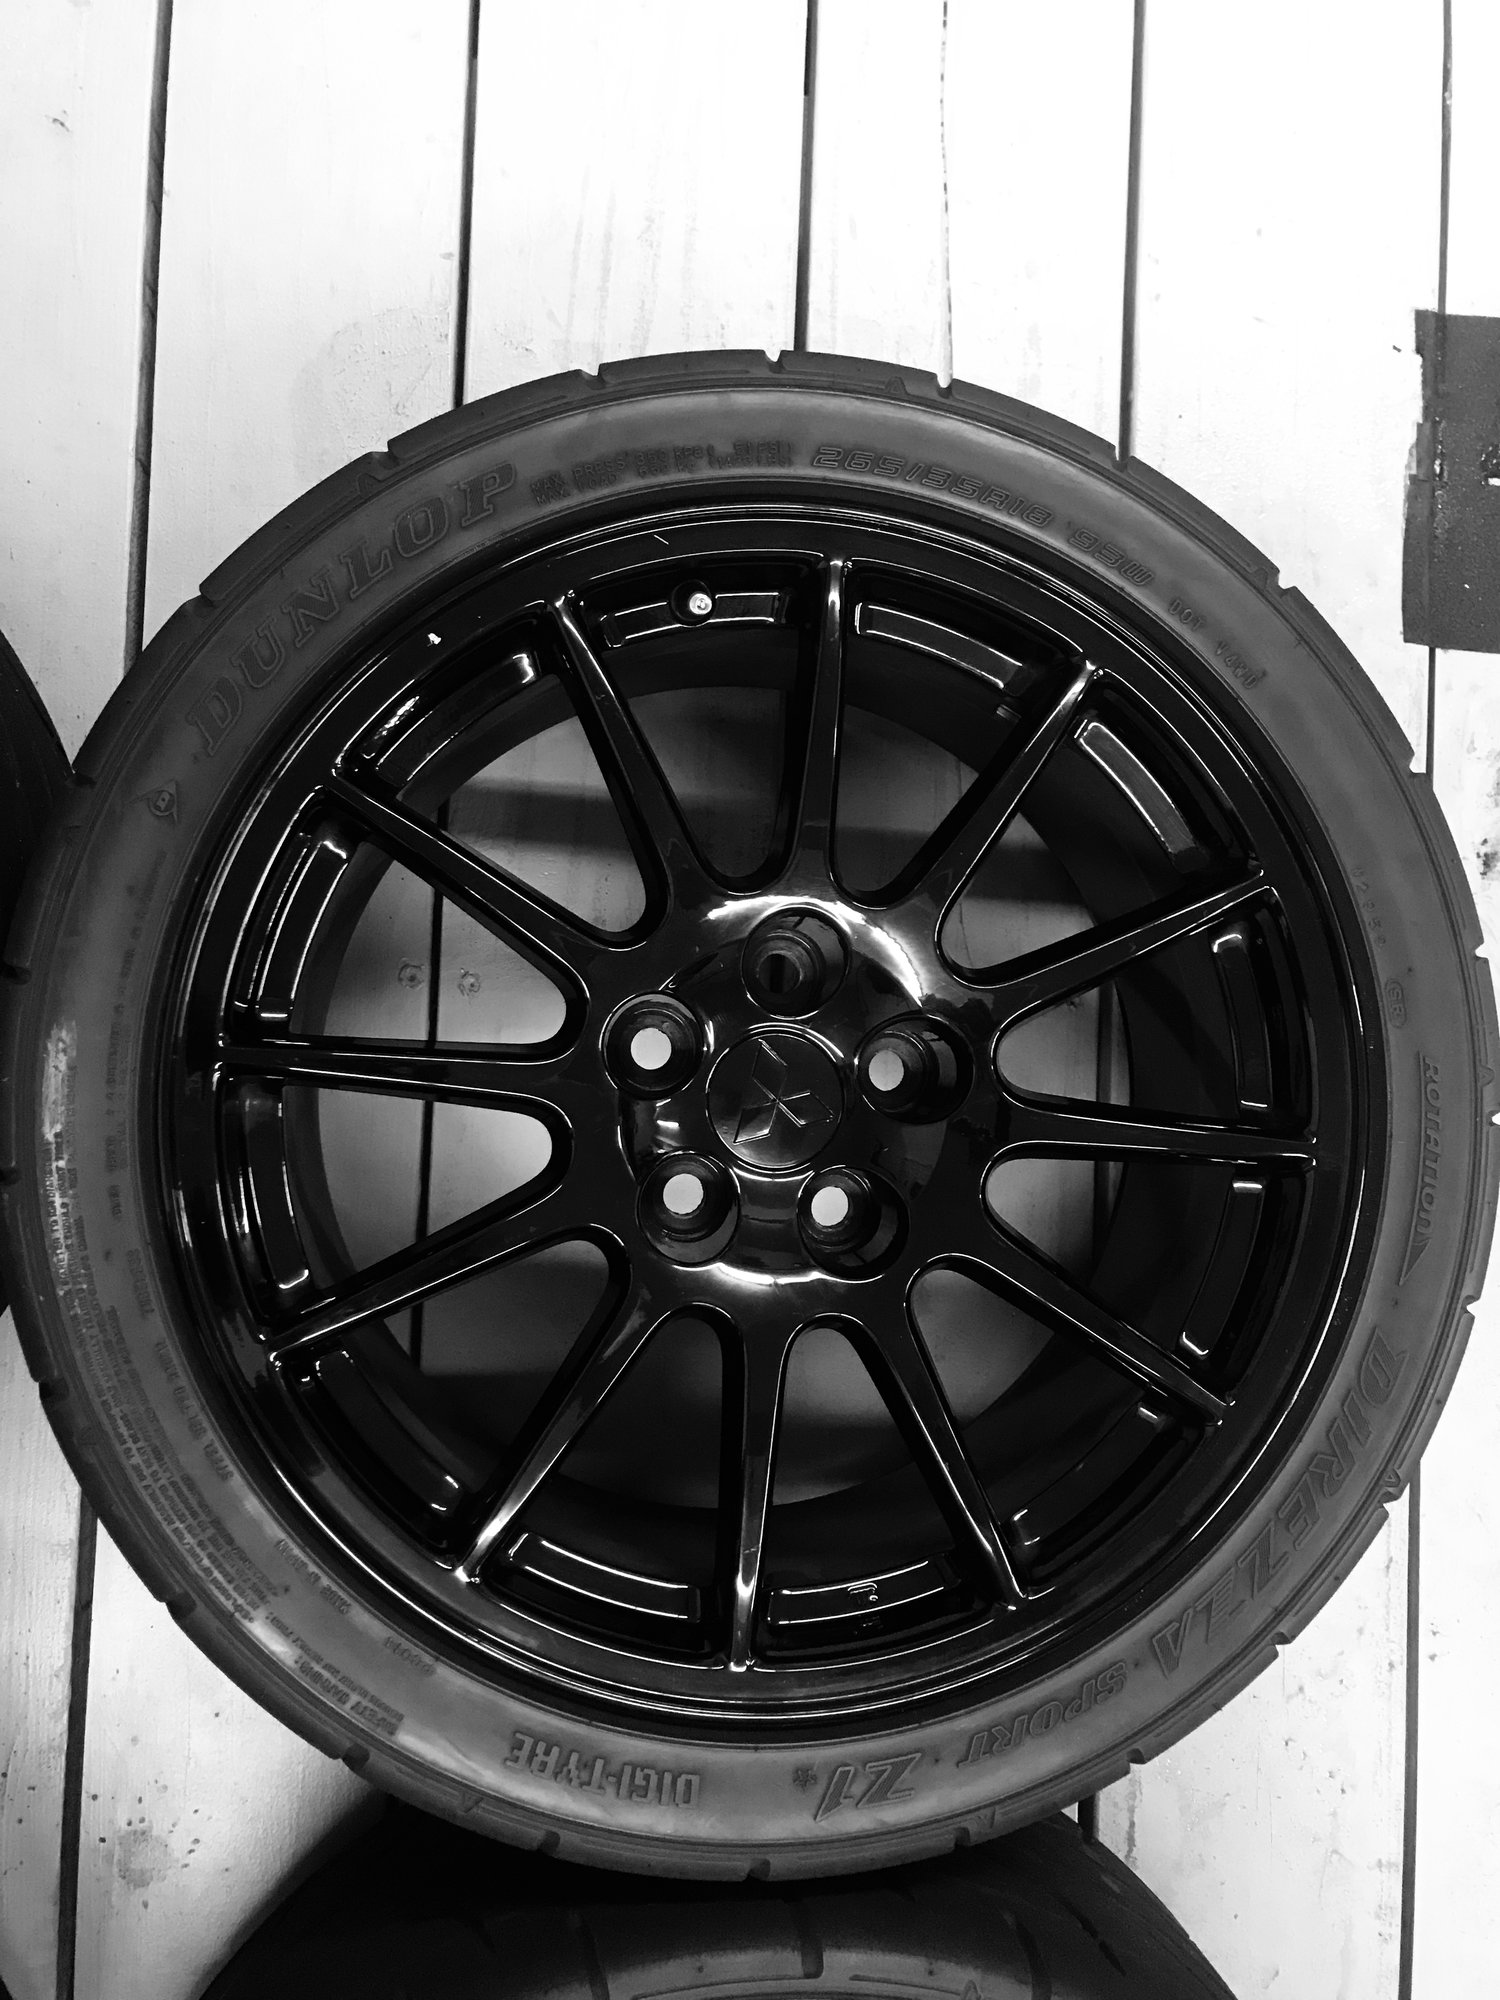 Wheels and Tires/Axles - EVO 10 GSR Wheels powder coated gloss black. With Dunlop 265/35-18 - Used - Omaha, NE 68117, United States